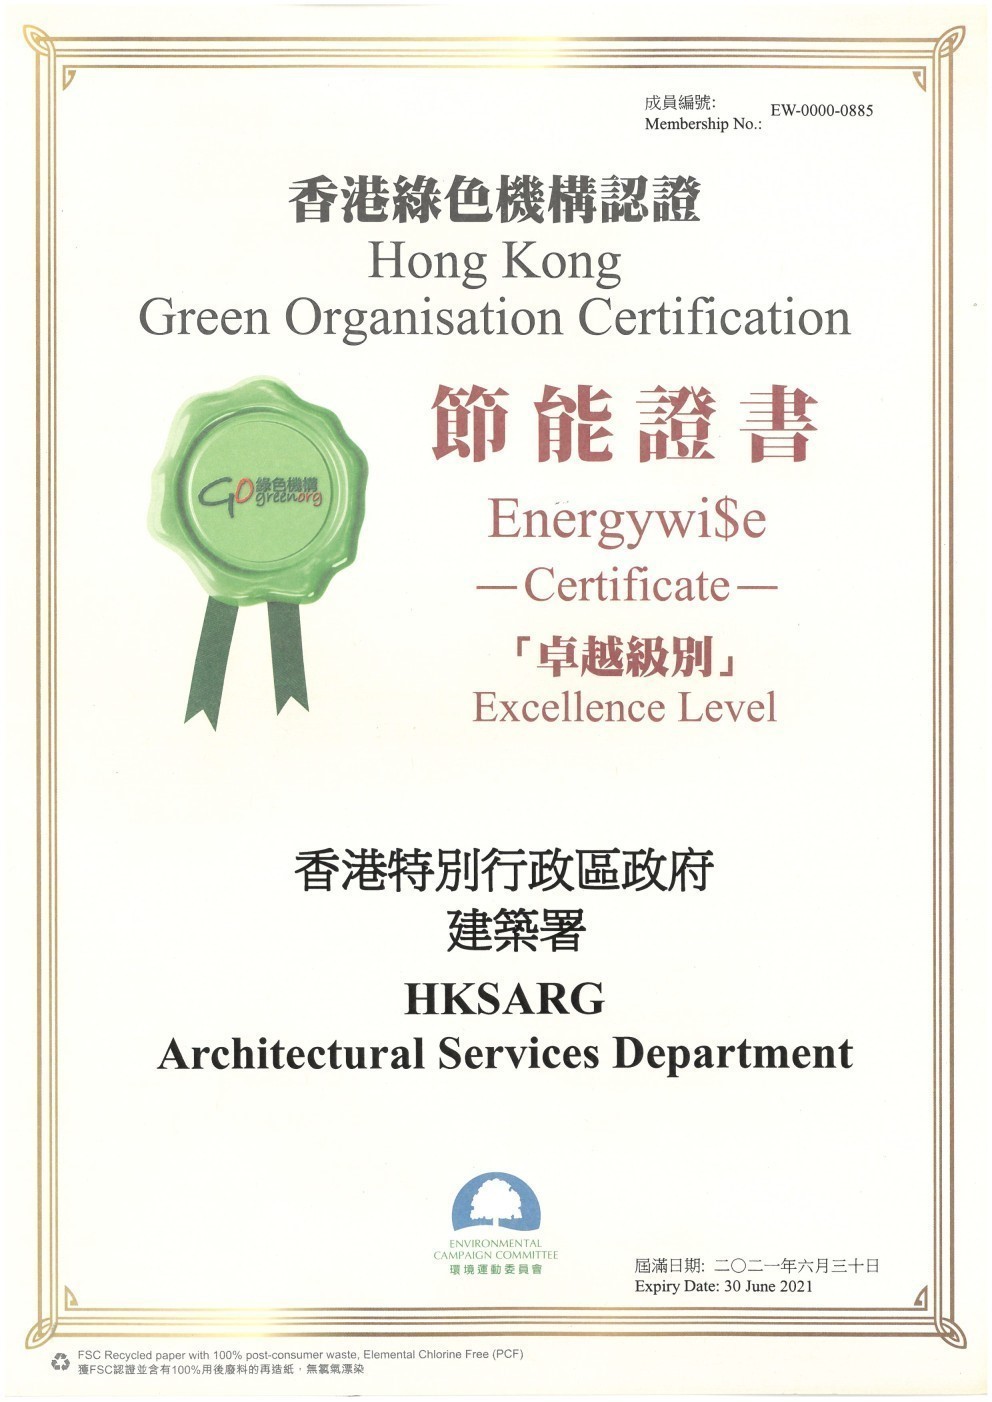 'Class of Excellence' Energywi$e Certificate